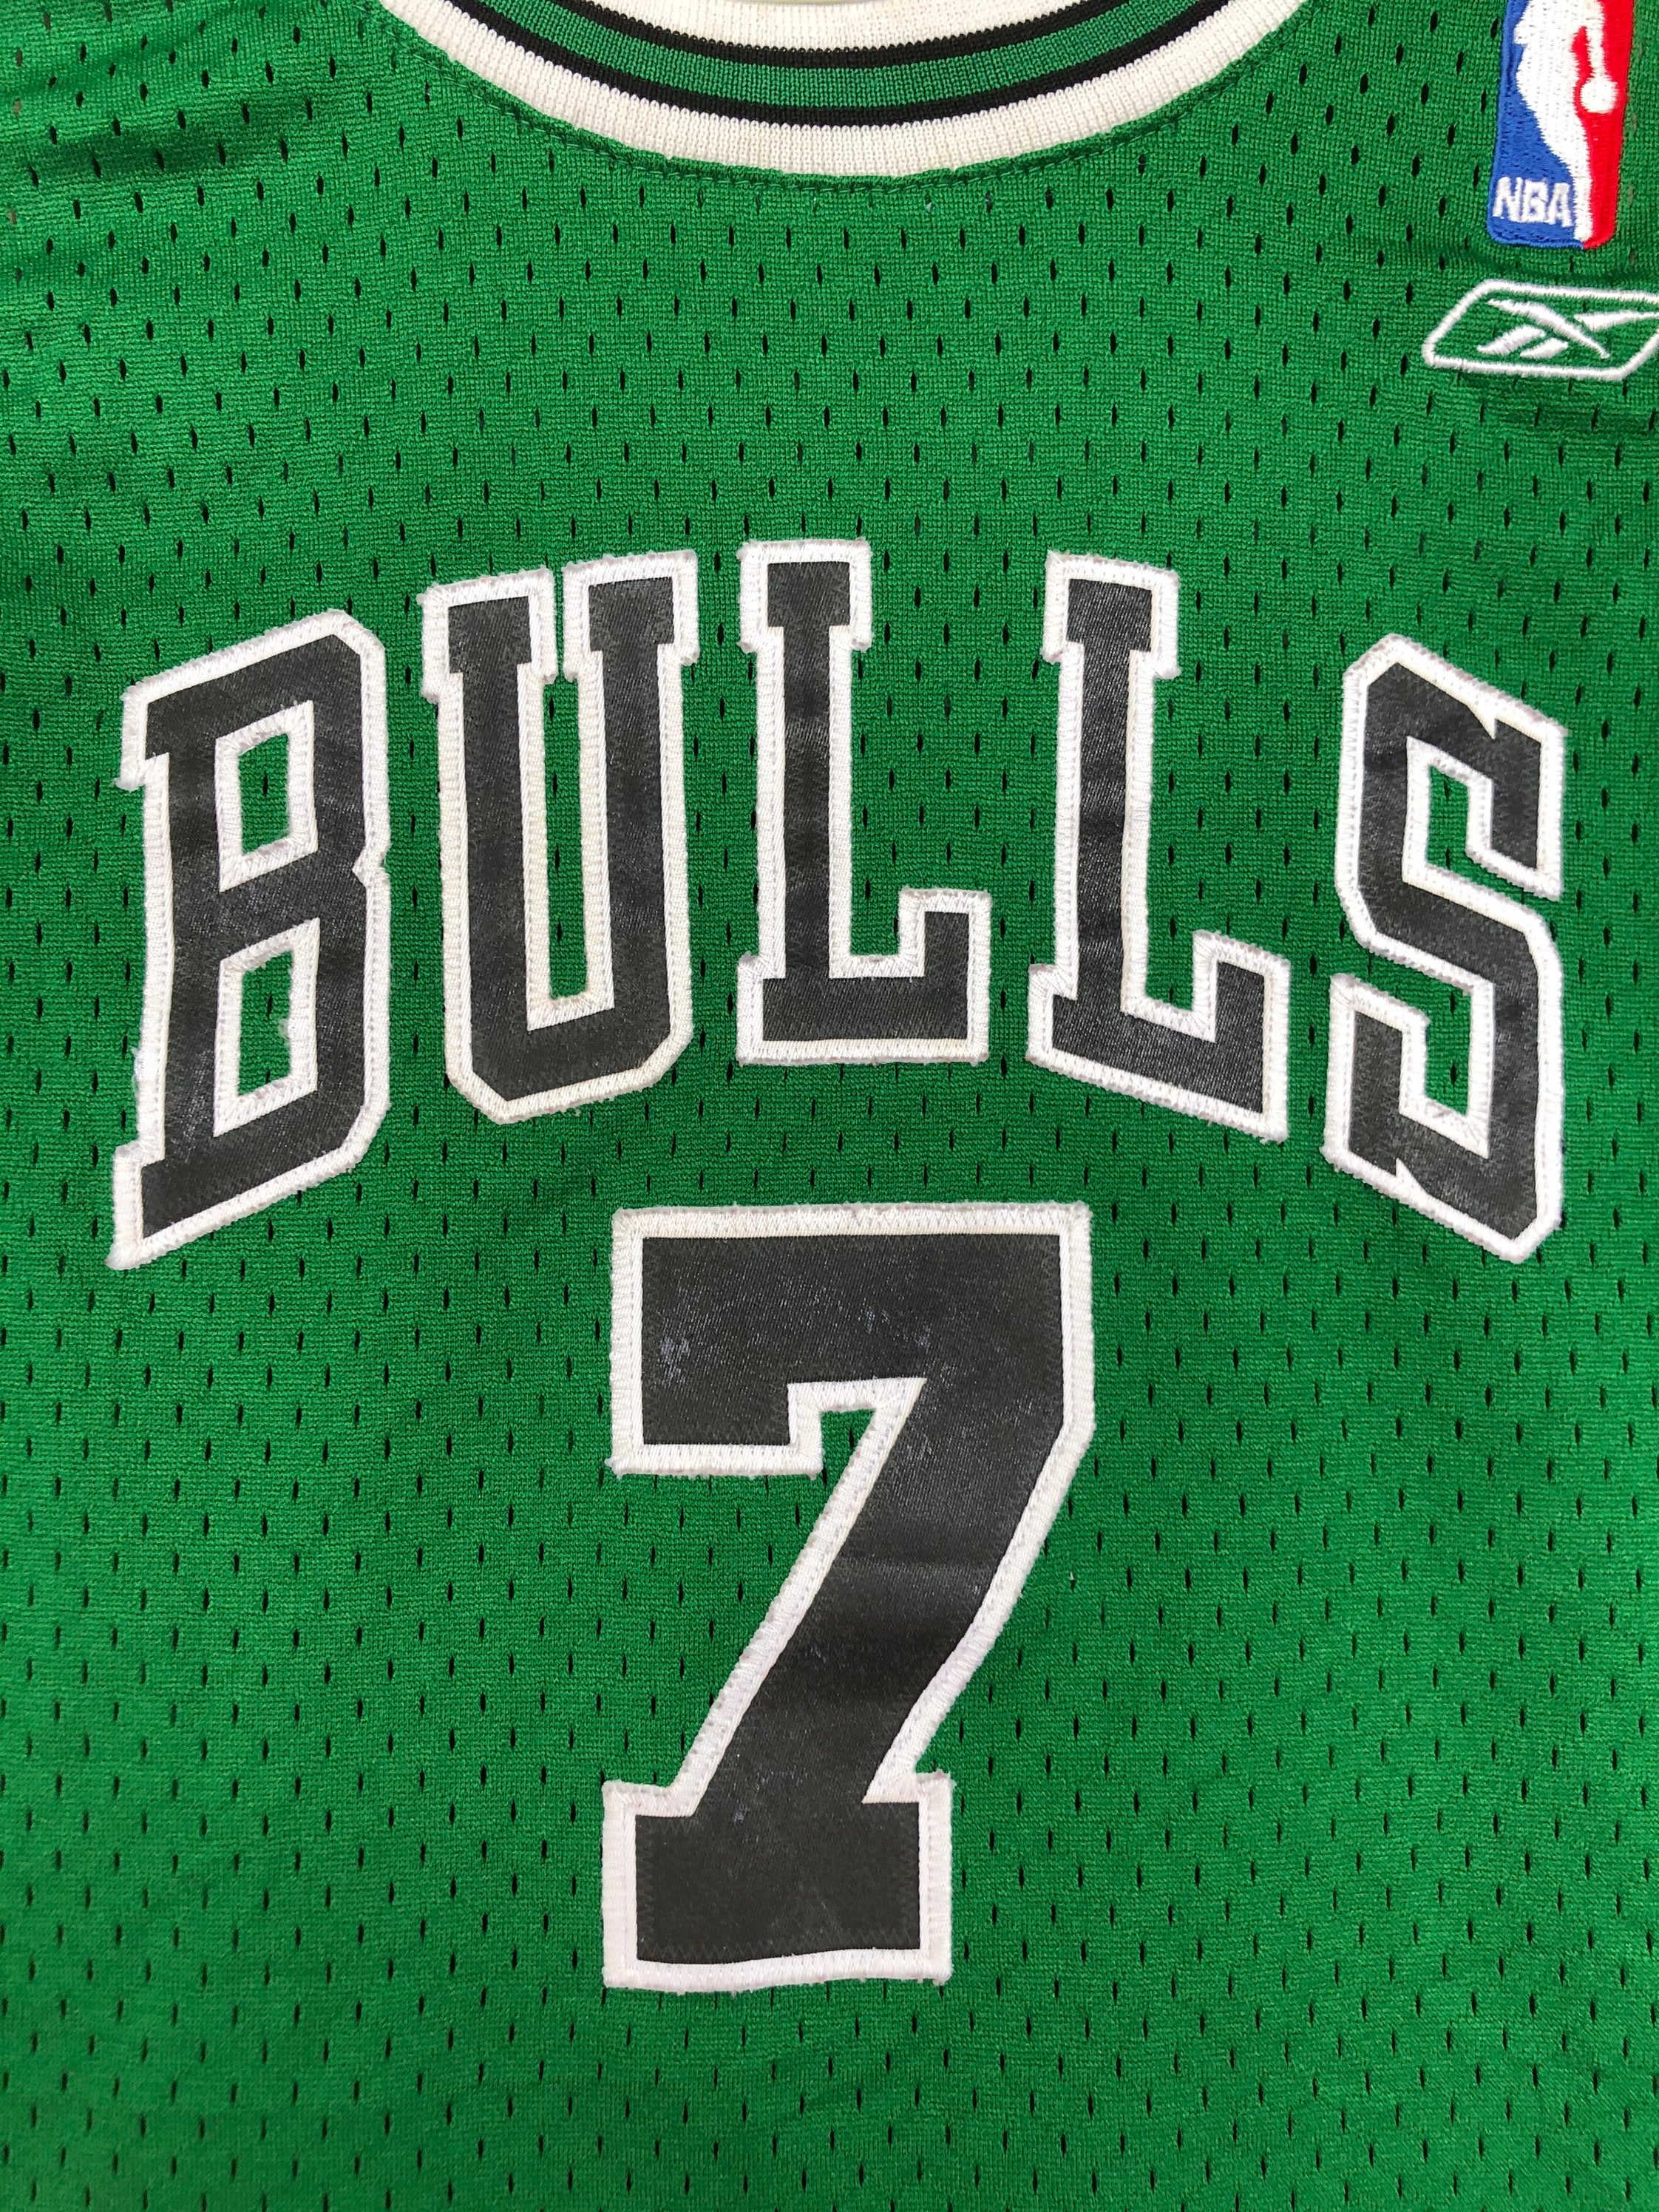 Favorite version of the St. Patrick's Day jersey? : r/chicagobulls